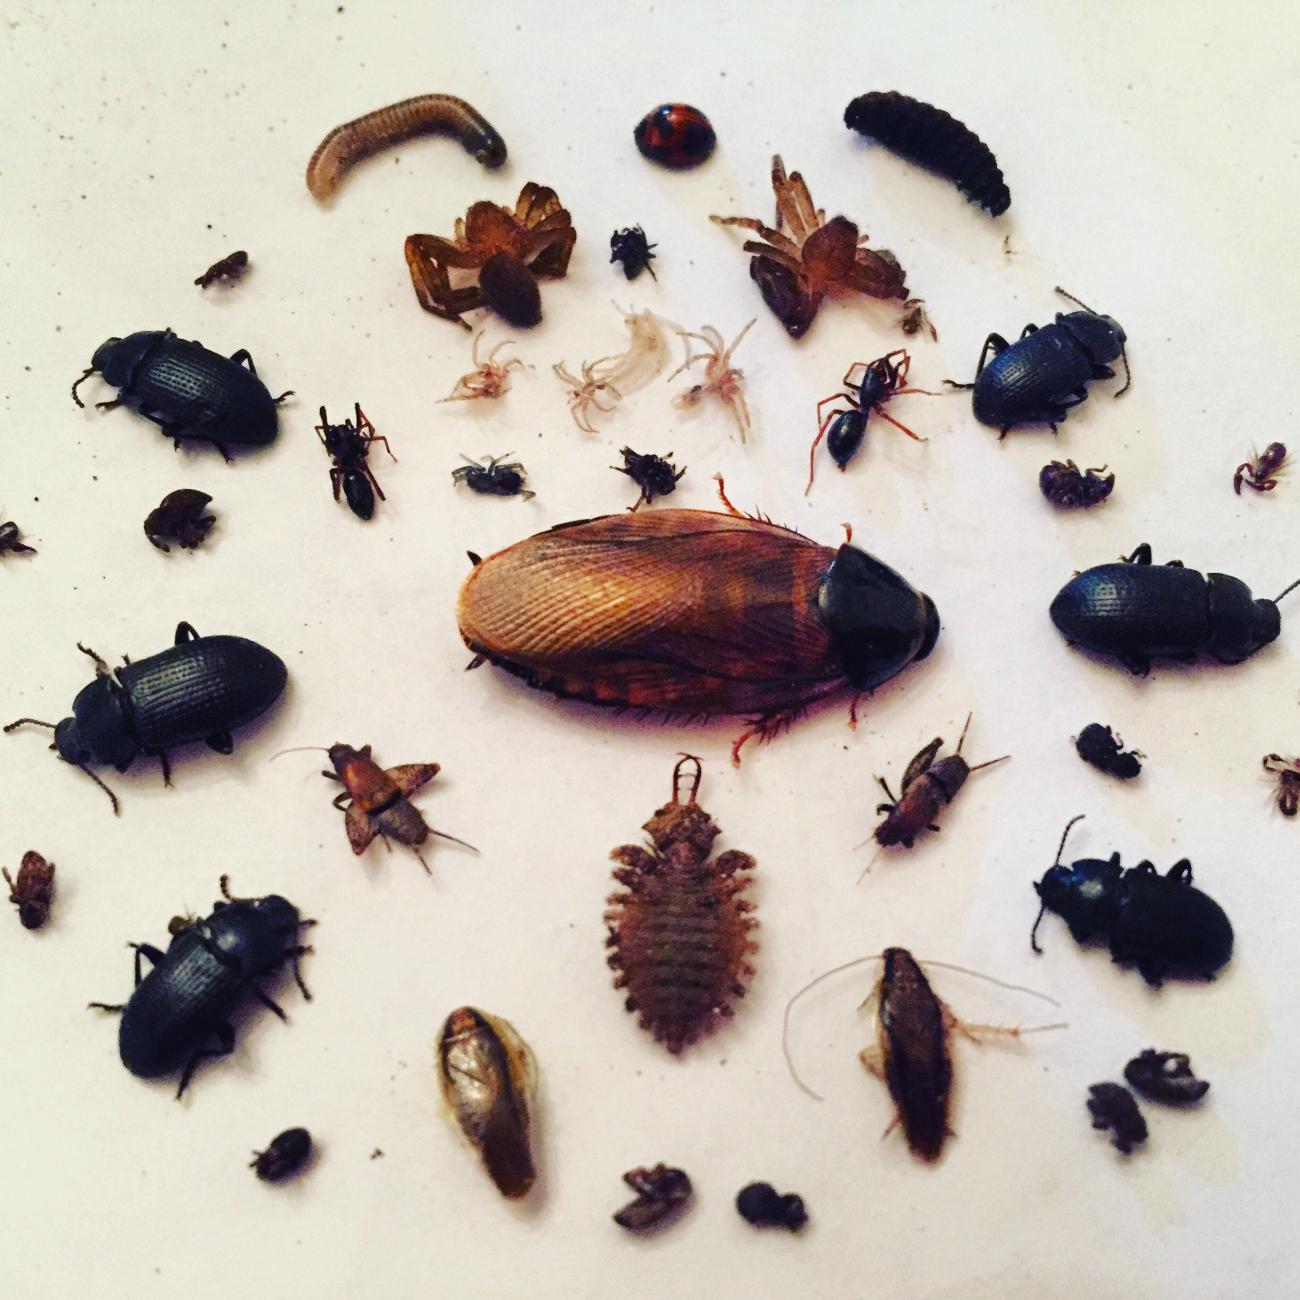 A number of different insects arranged in a circular pattern